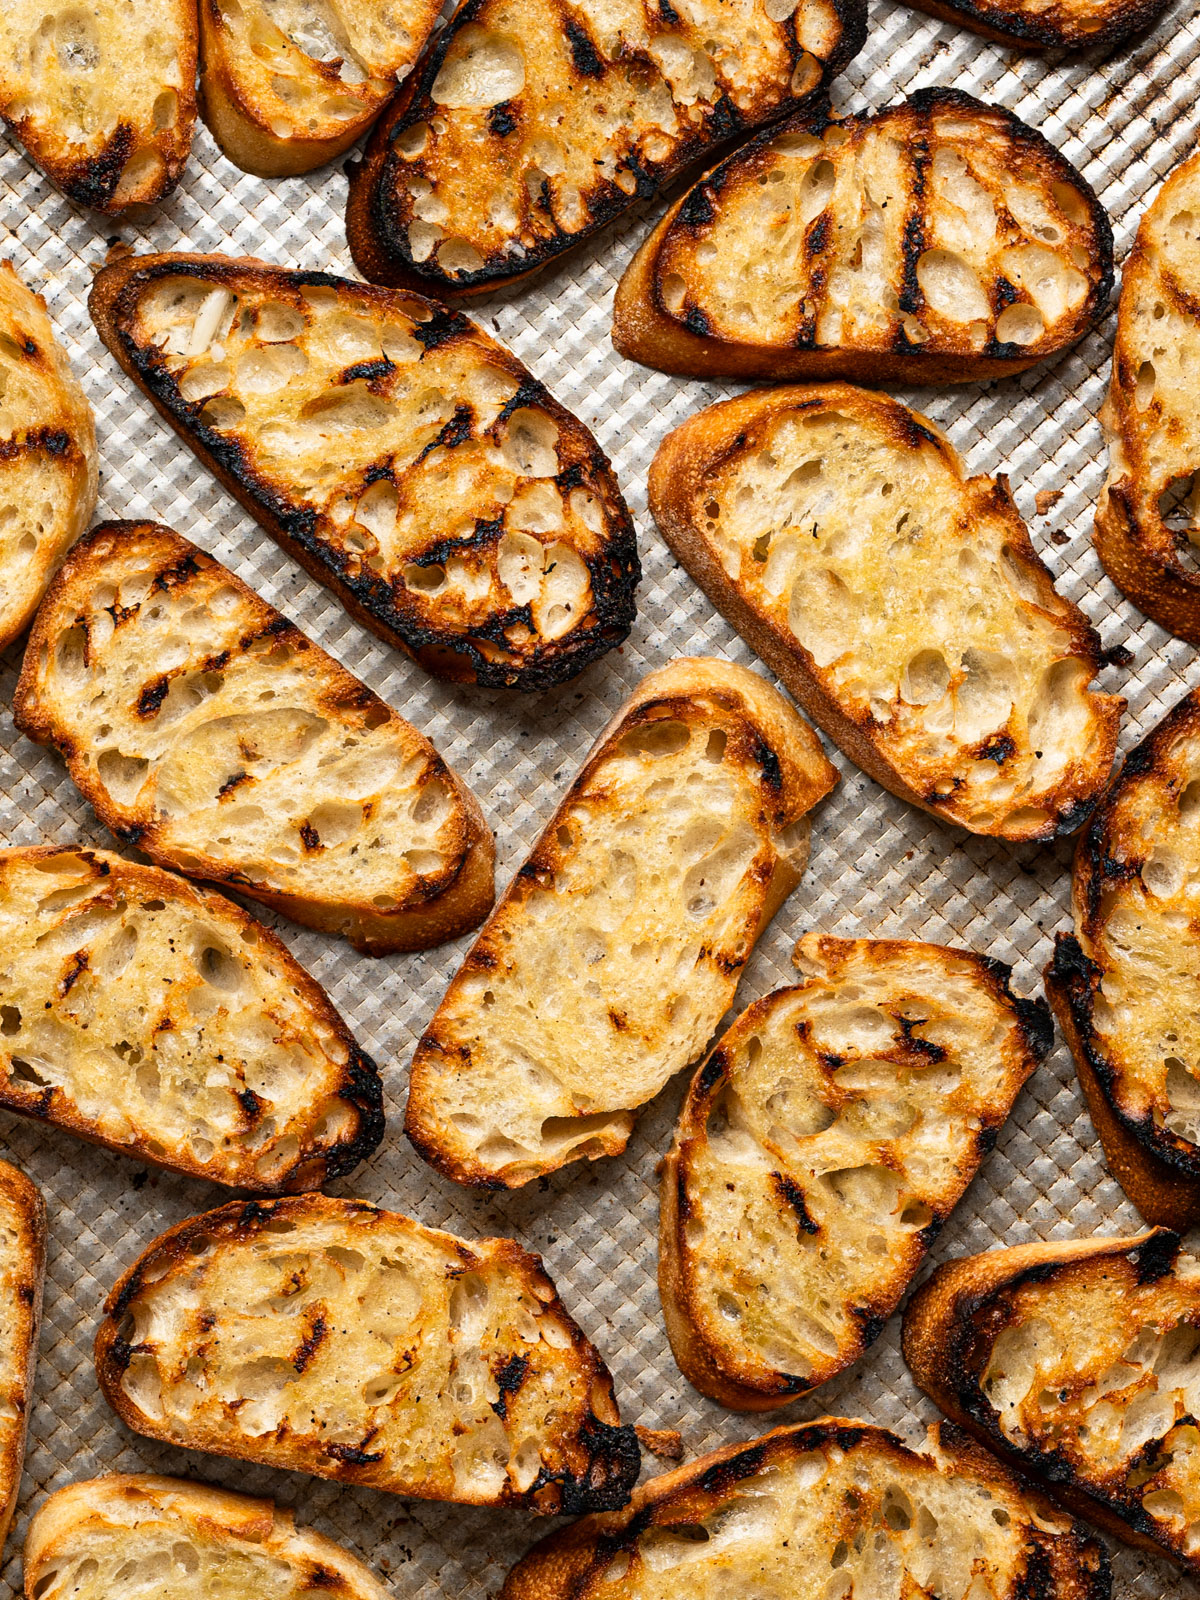 grilled and toasted bread slices on baking sheet